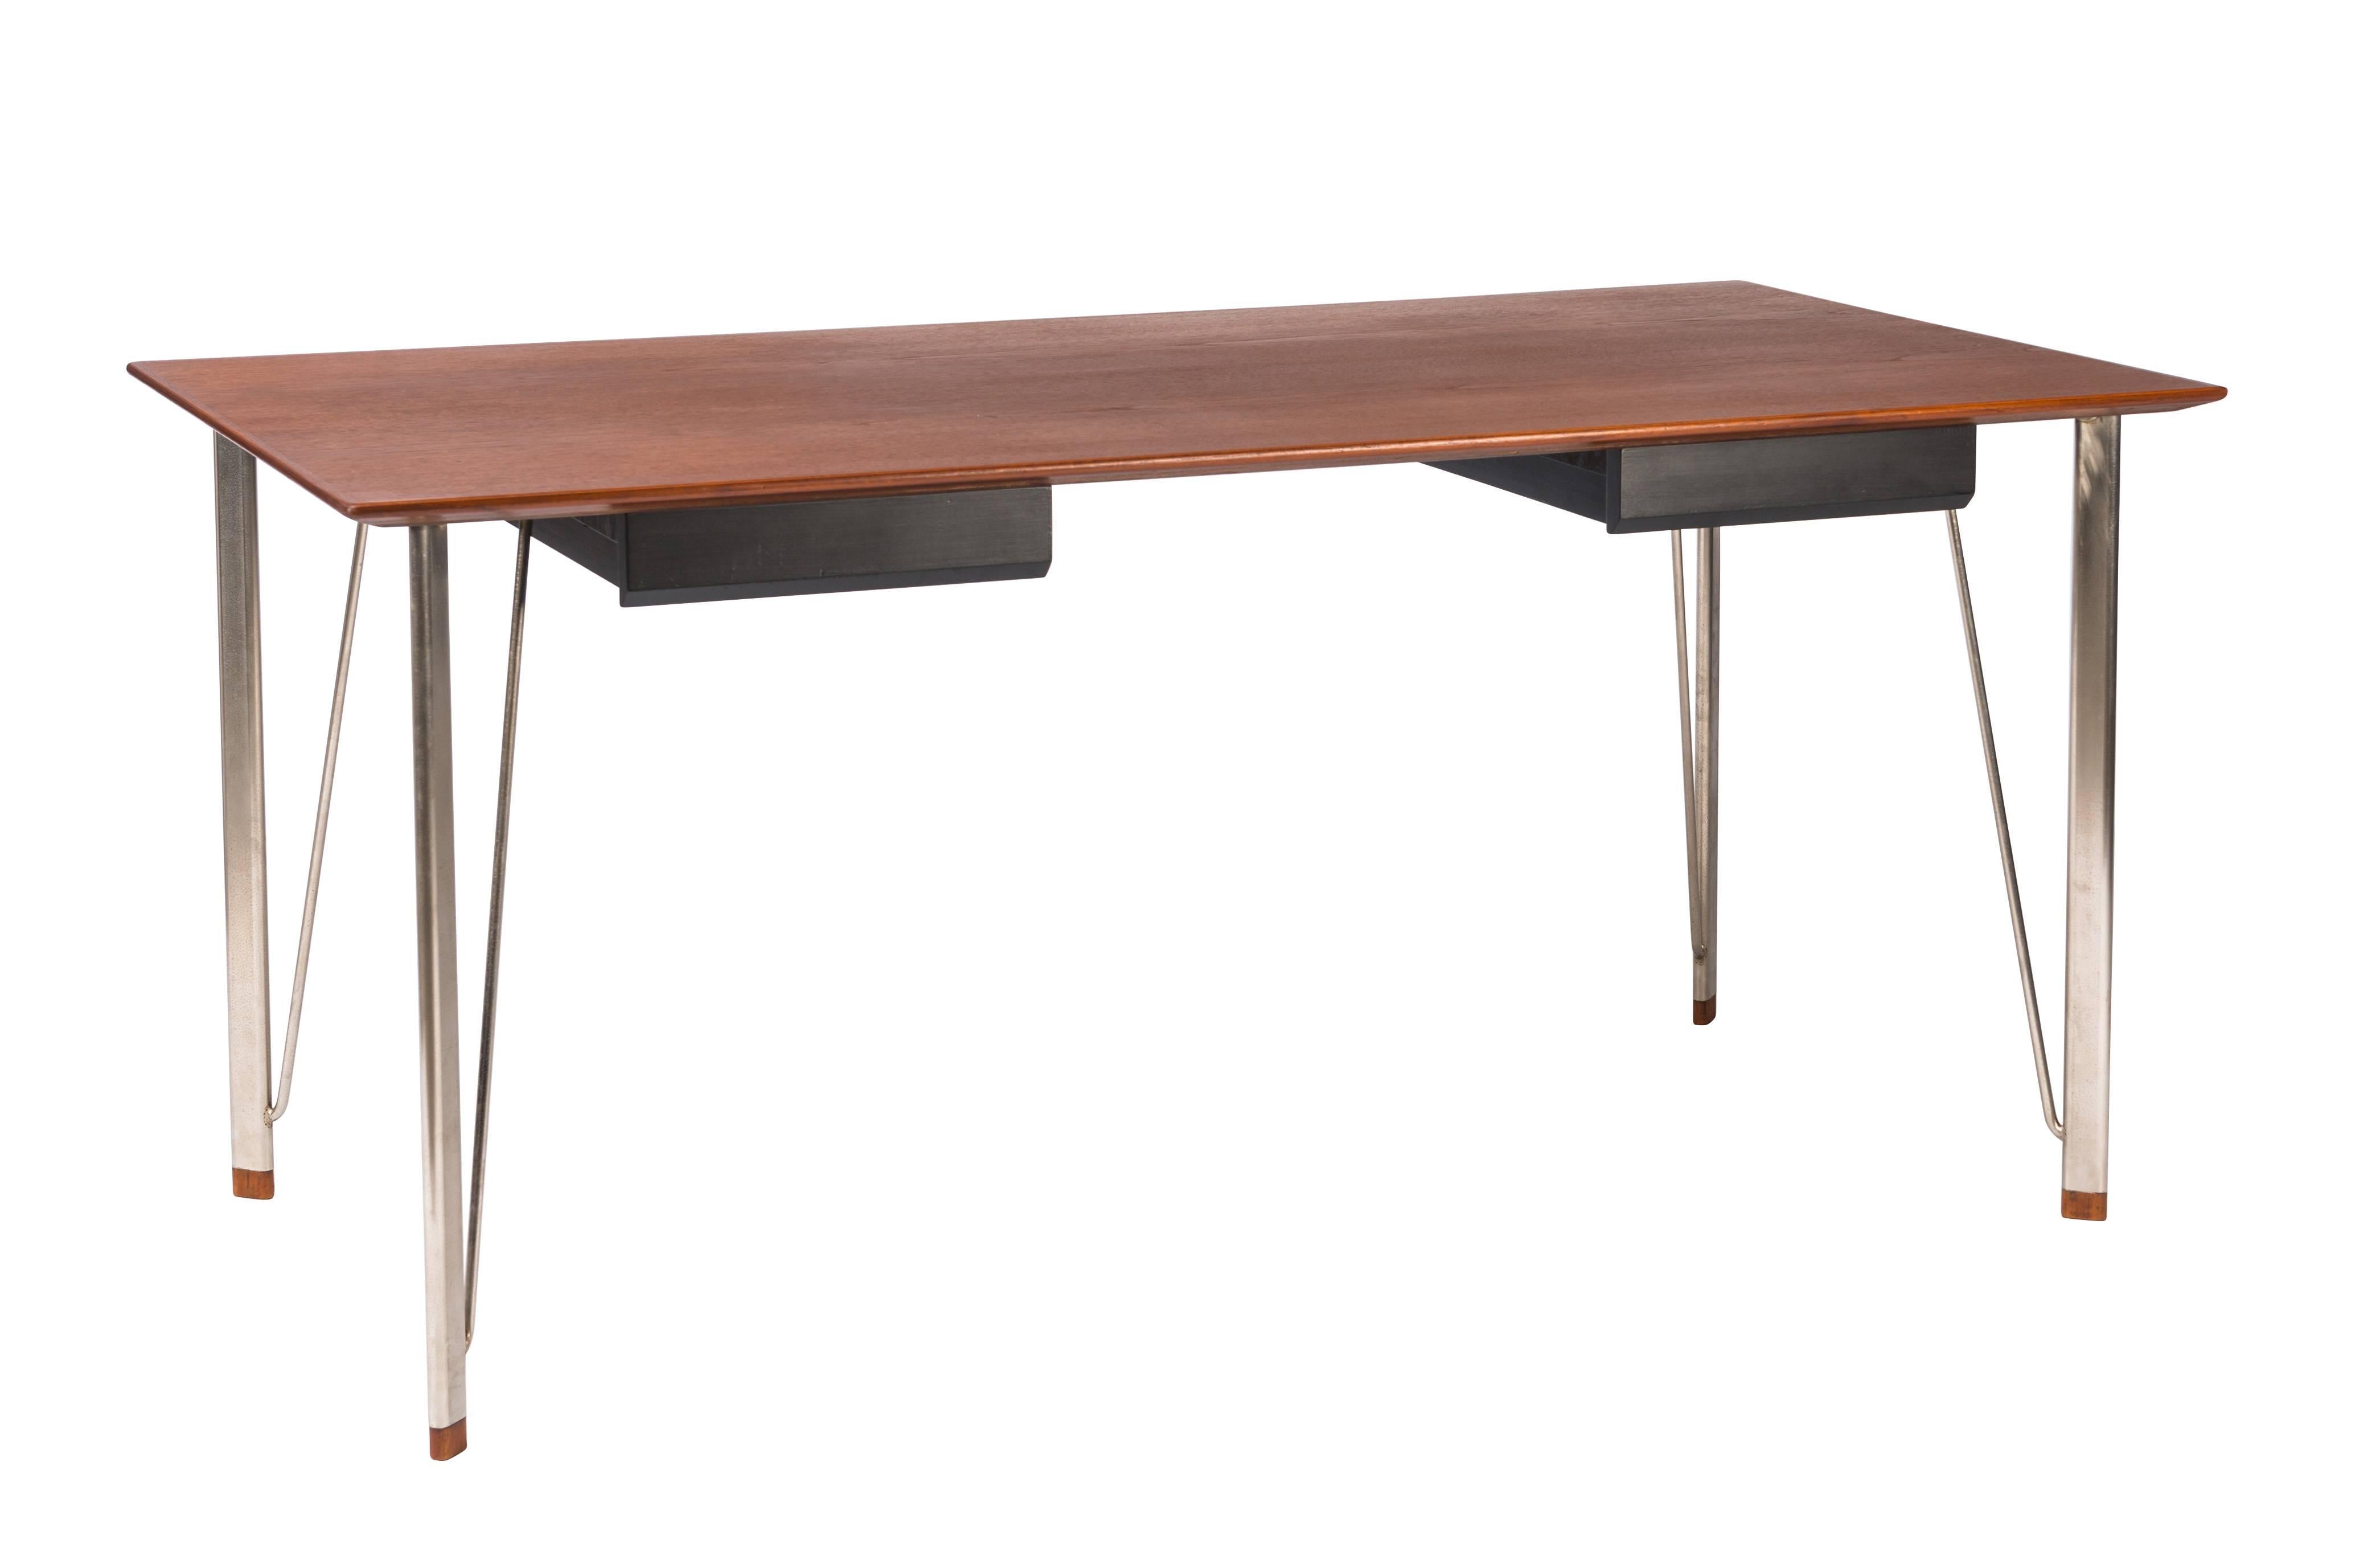 Rare teak desk designed by Arne Jacobsen, produced by Fritz Hansen in Denmark. Desk with two black drawers and teak tips to metal legs. Refinished.